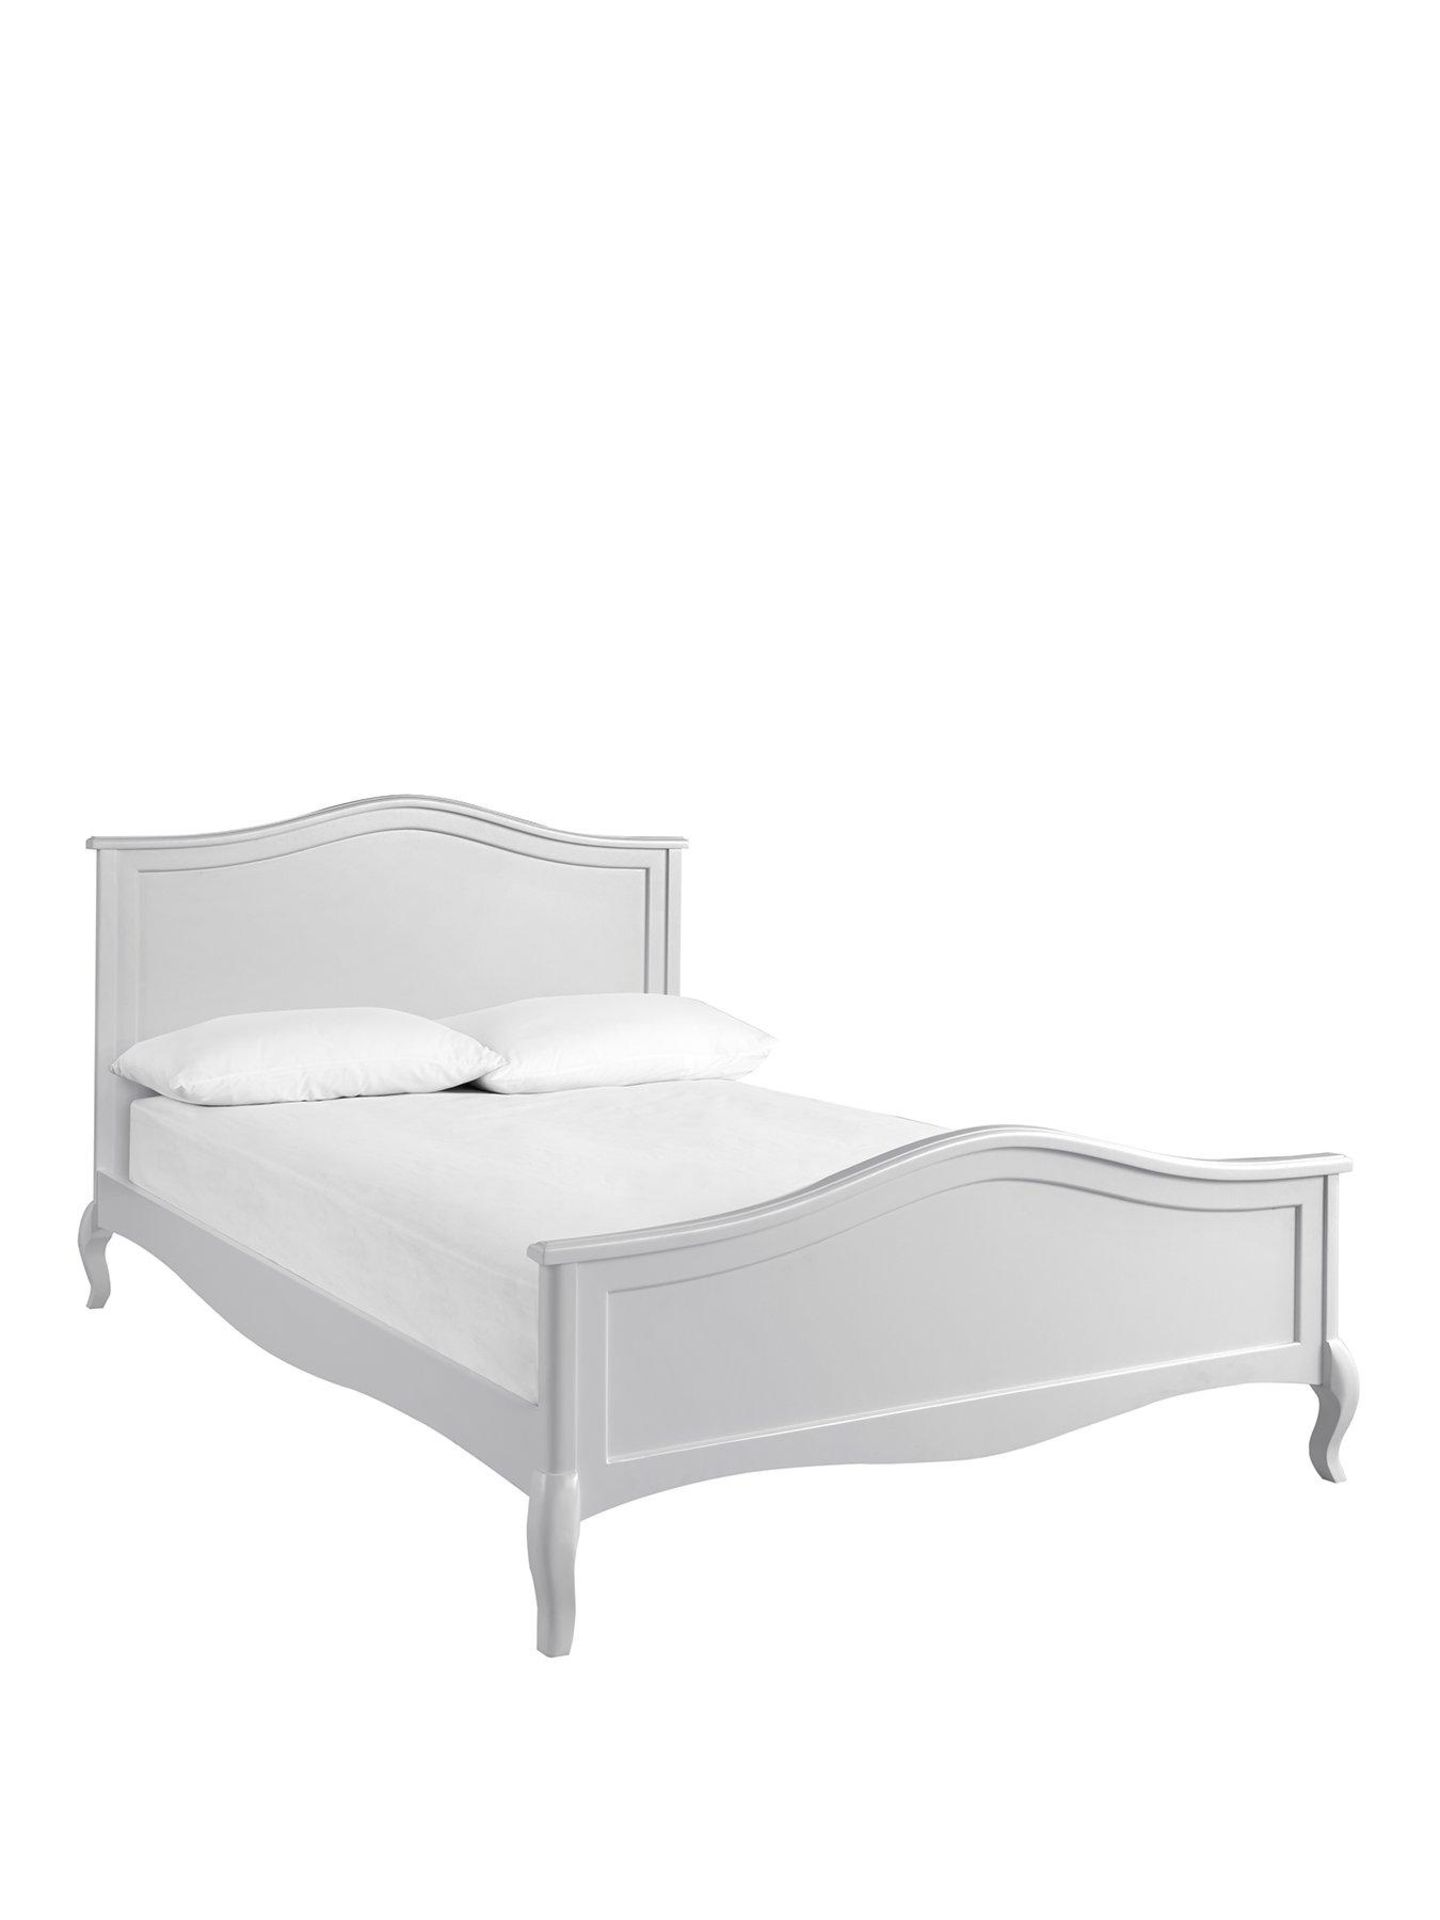 Boxed Item Olivia Double Bed [Grey] 110X145X198Cm Rrp:£558.0 - Image 2 of 2